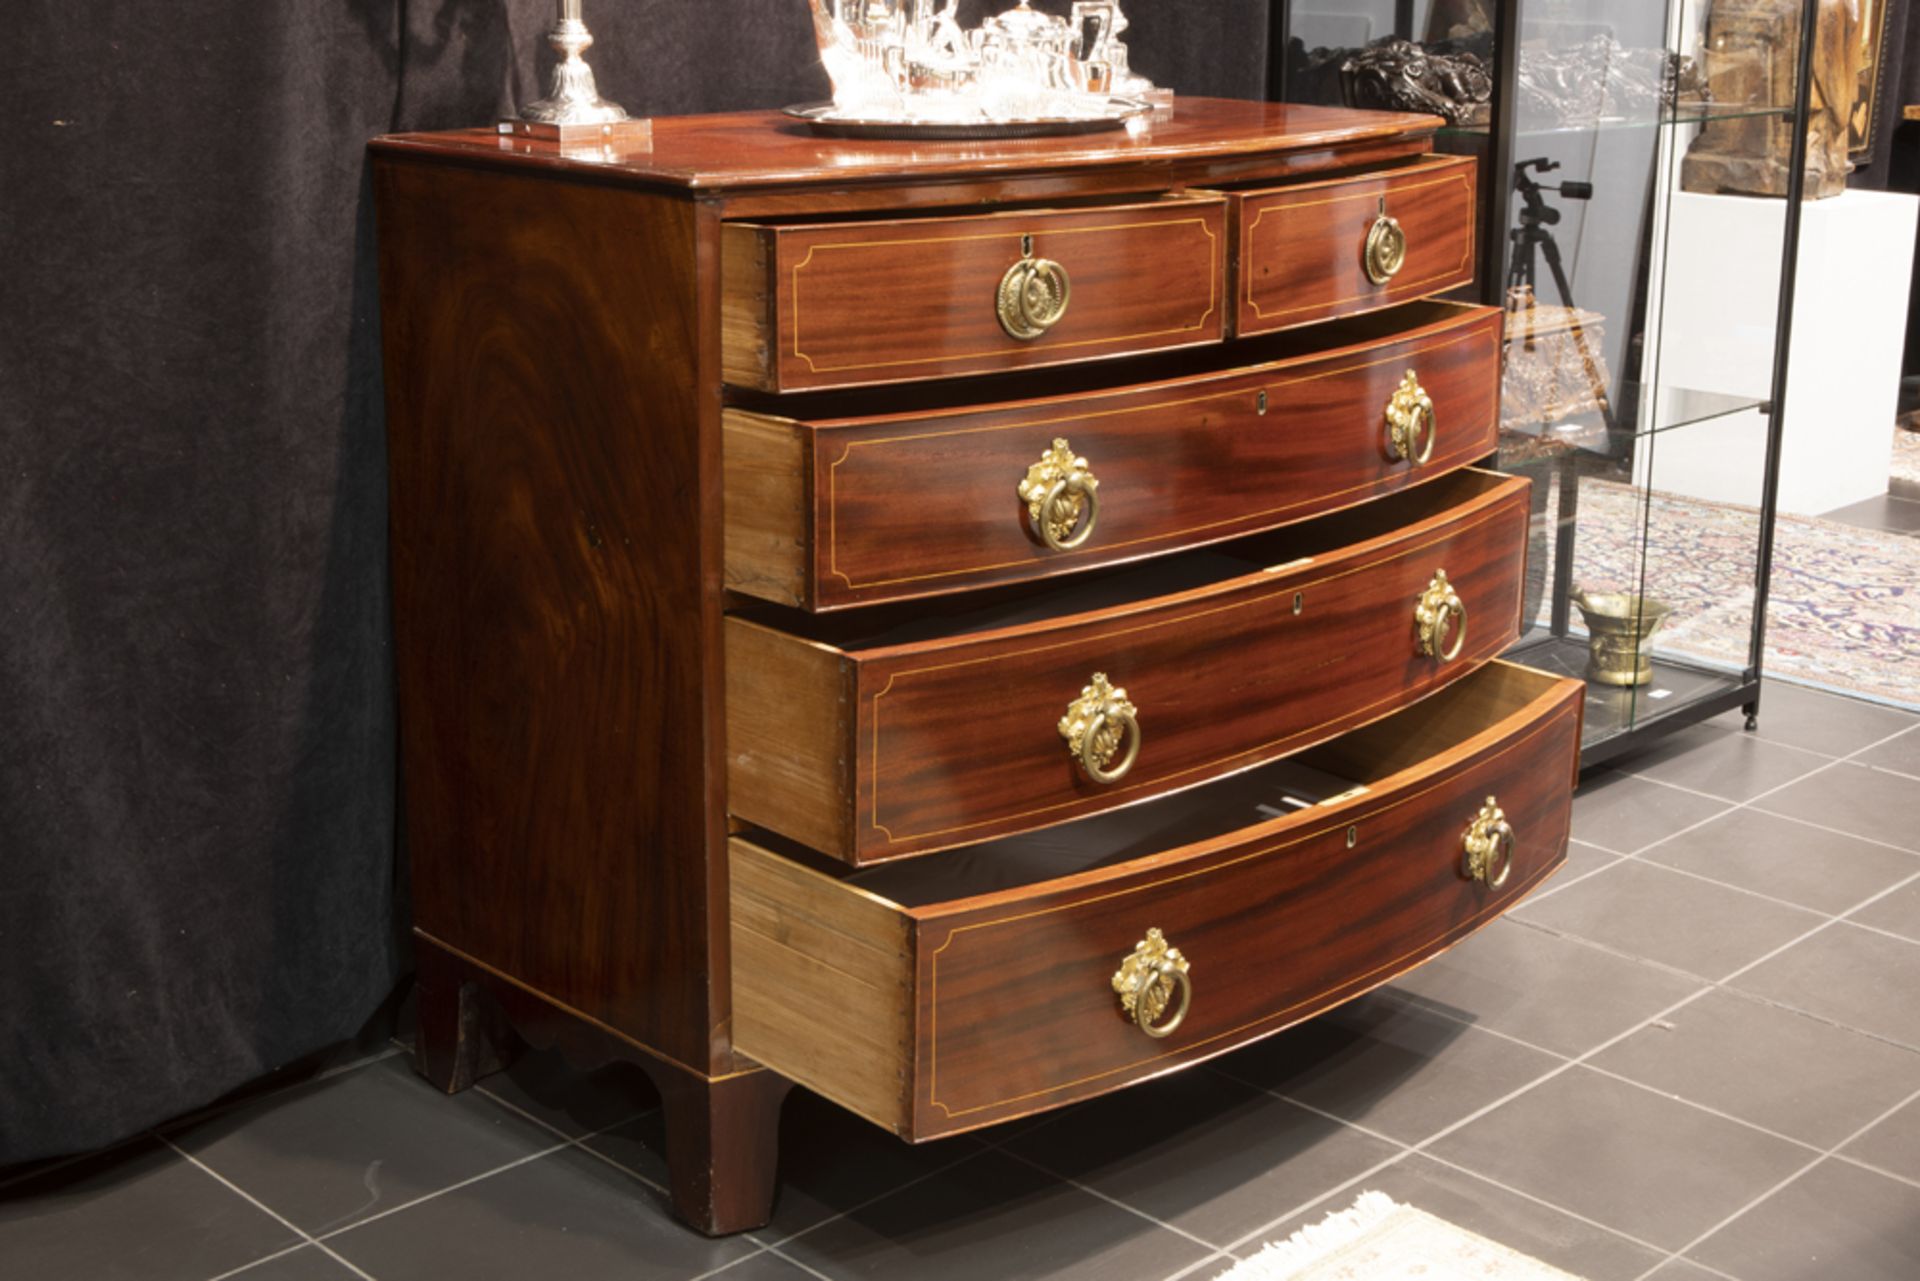 antique English chest of drawers in mahogany with inlaid bands||Mooie antieke Engelse commode met - Image 2 of 2